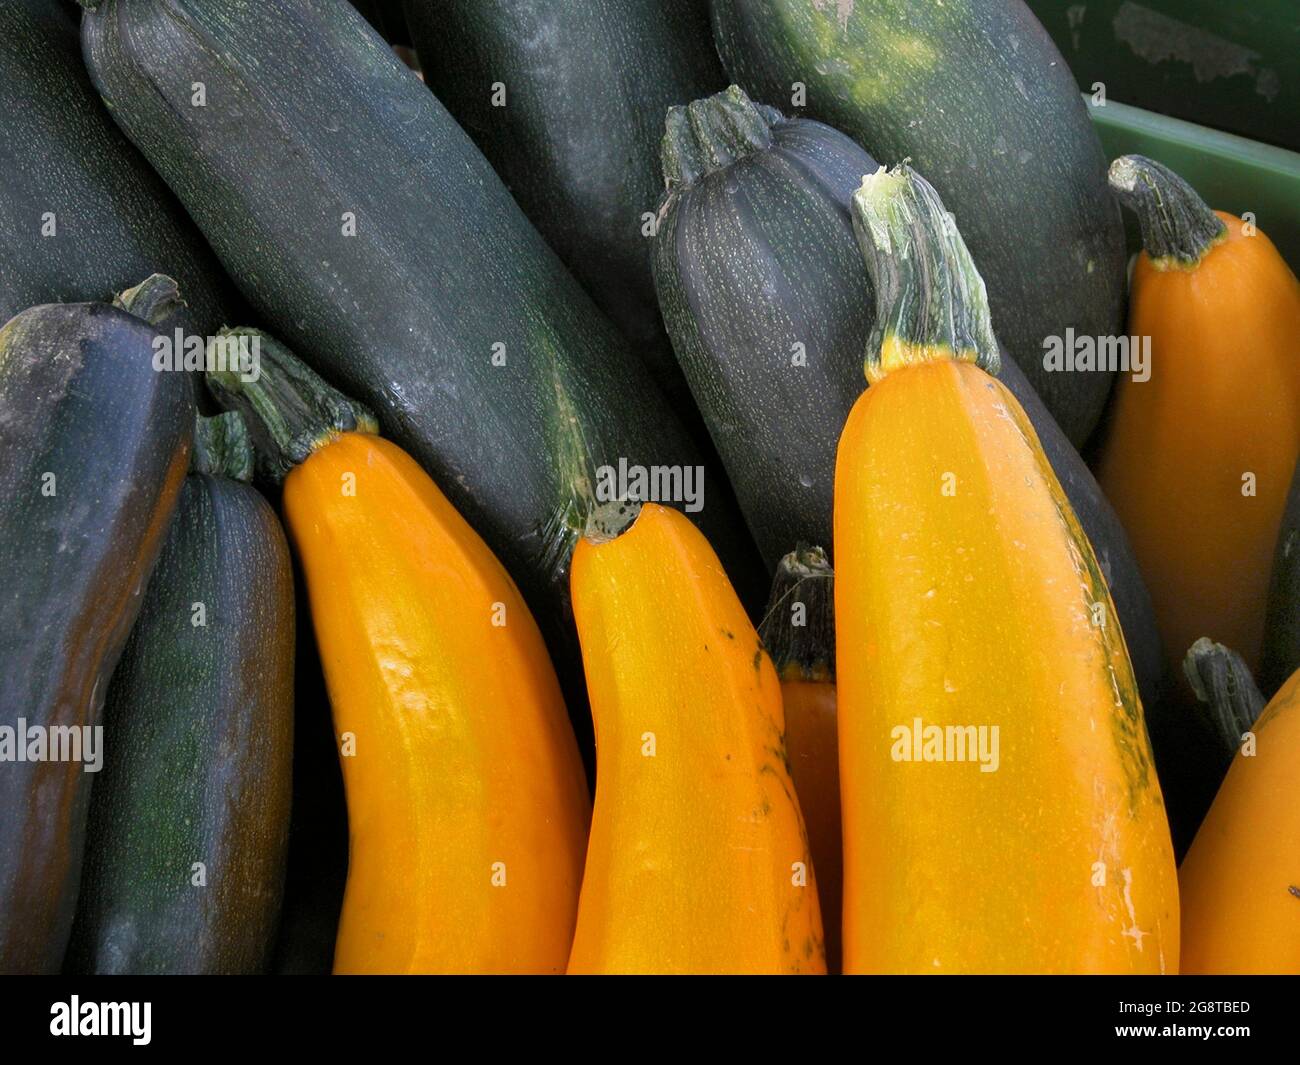 courgette, zucchini (Cucurbita pepo var. giromontiia, Cucurbita pepo subsp. pepo convar. giromontiina), yellow and green courgettes Stock Photo